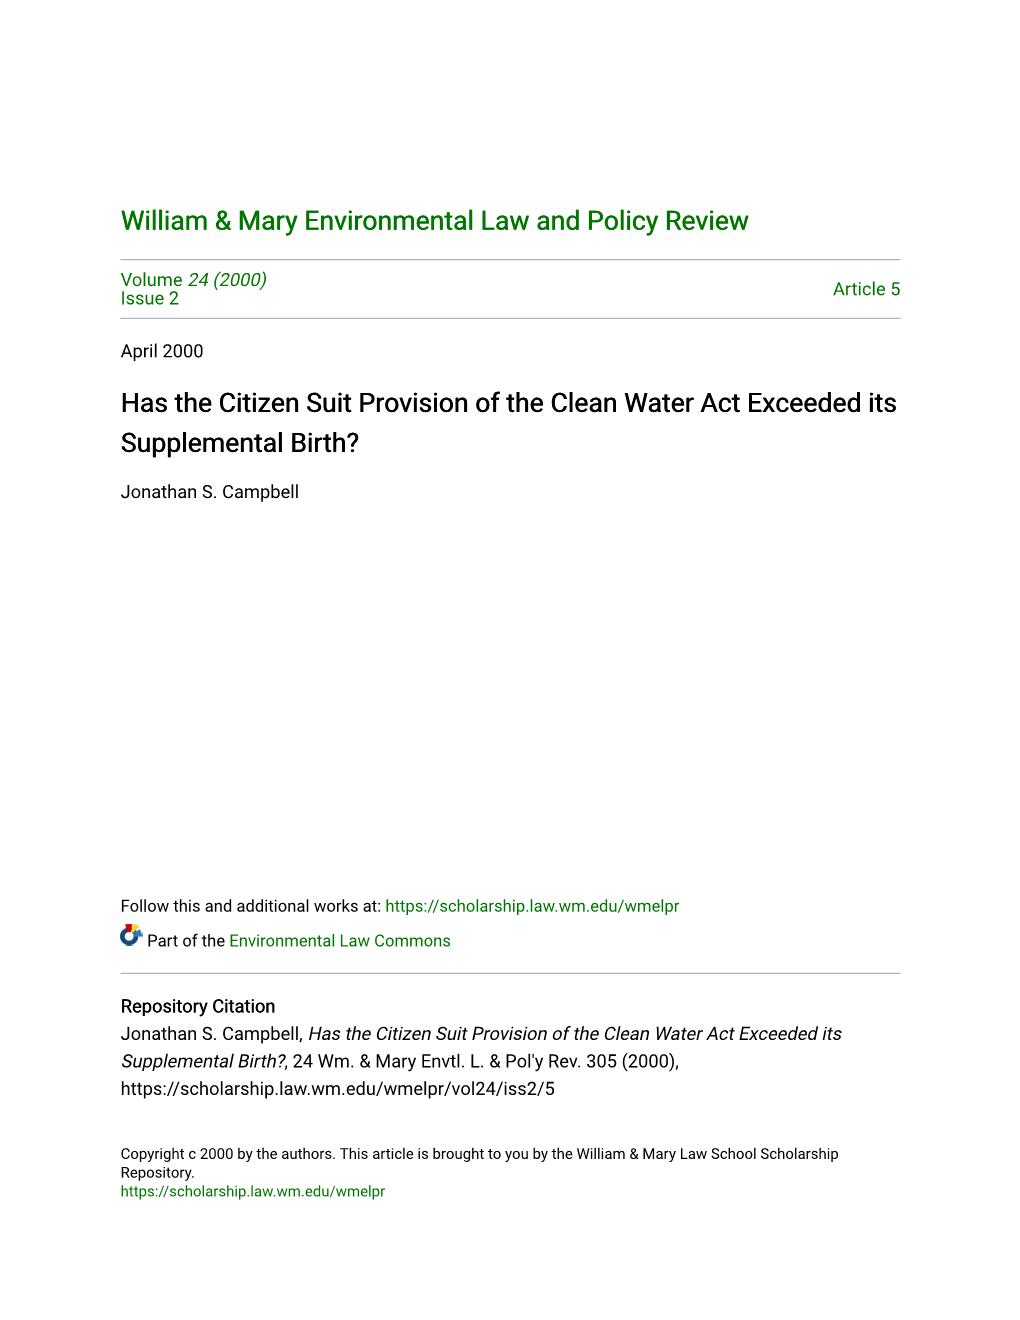 Has the Citizen Suit Provision of the Clean Water Act Exceeded Its Supplemental Birth?